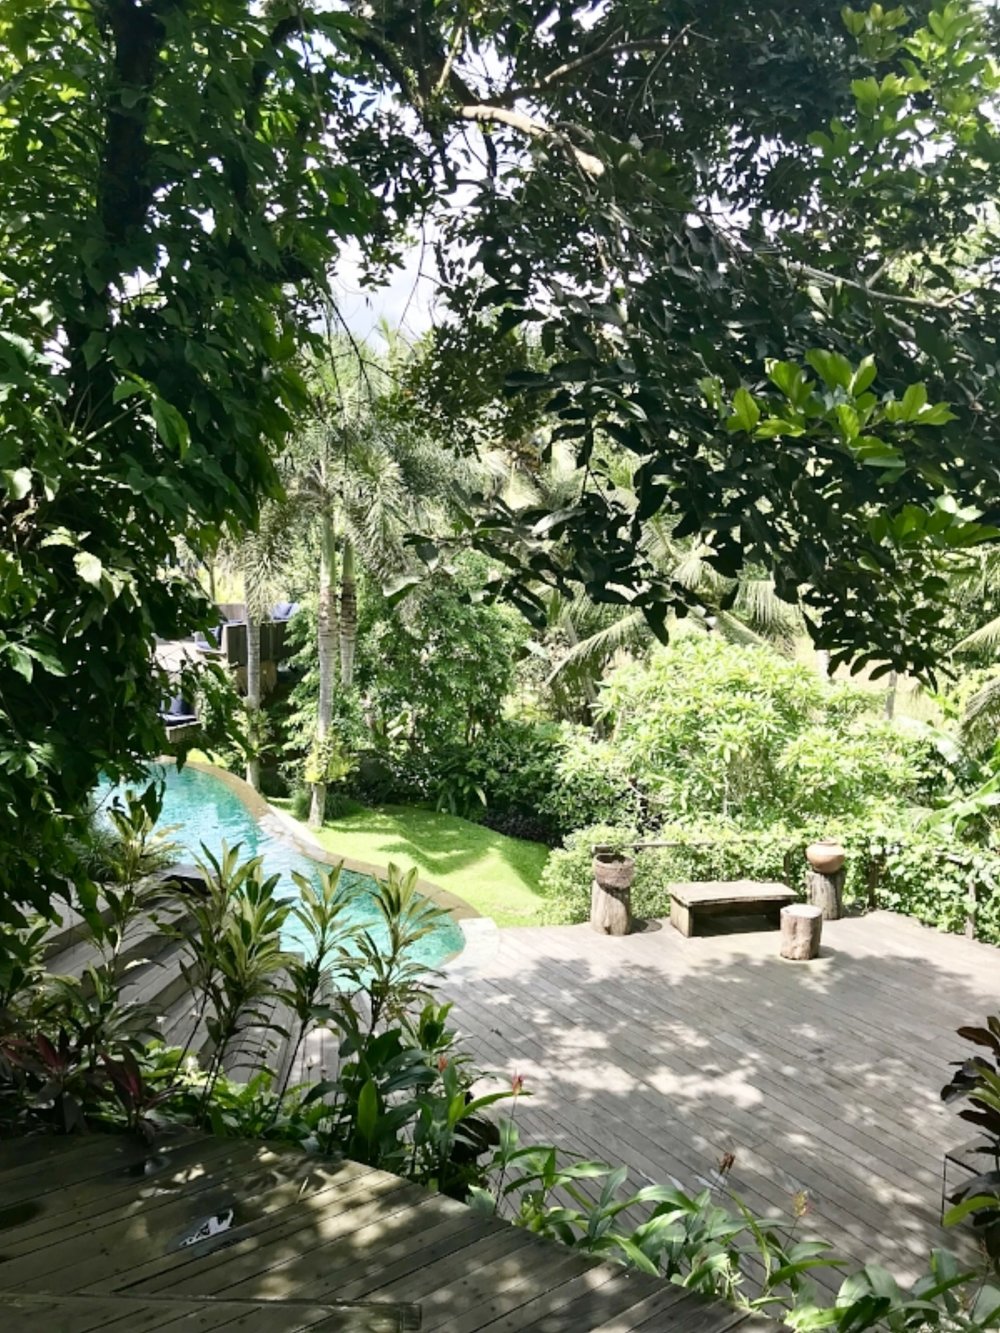 Soulshine is an absolute sanctuary in Ubud